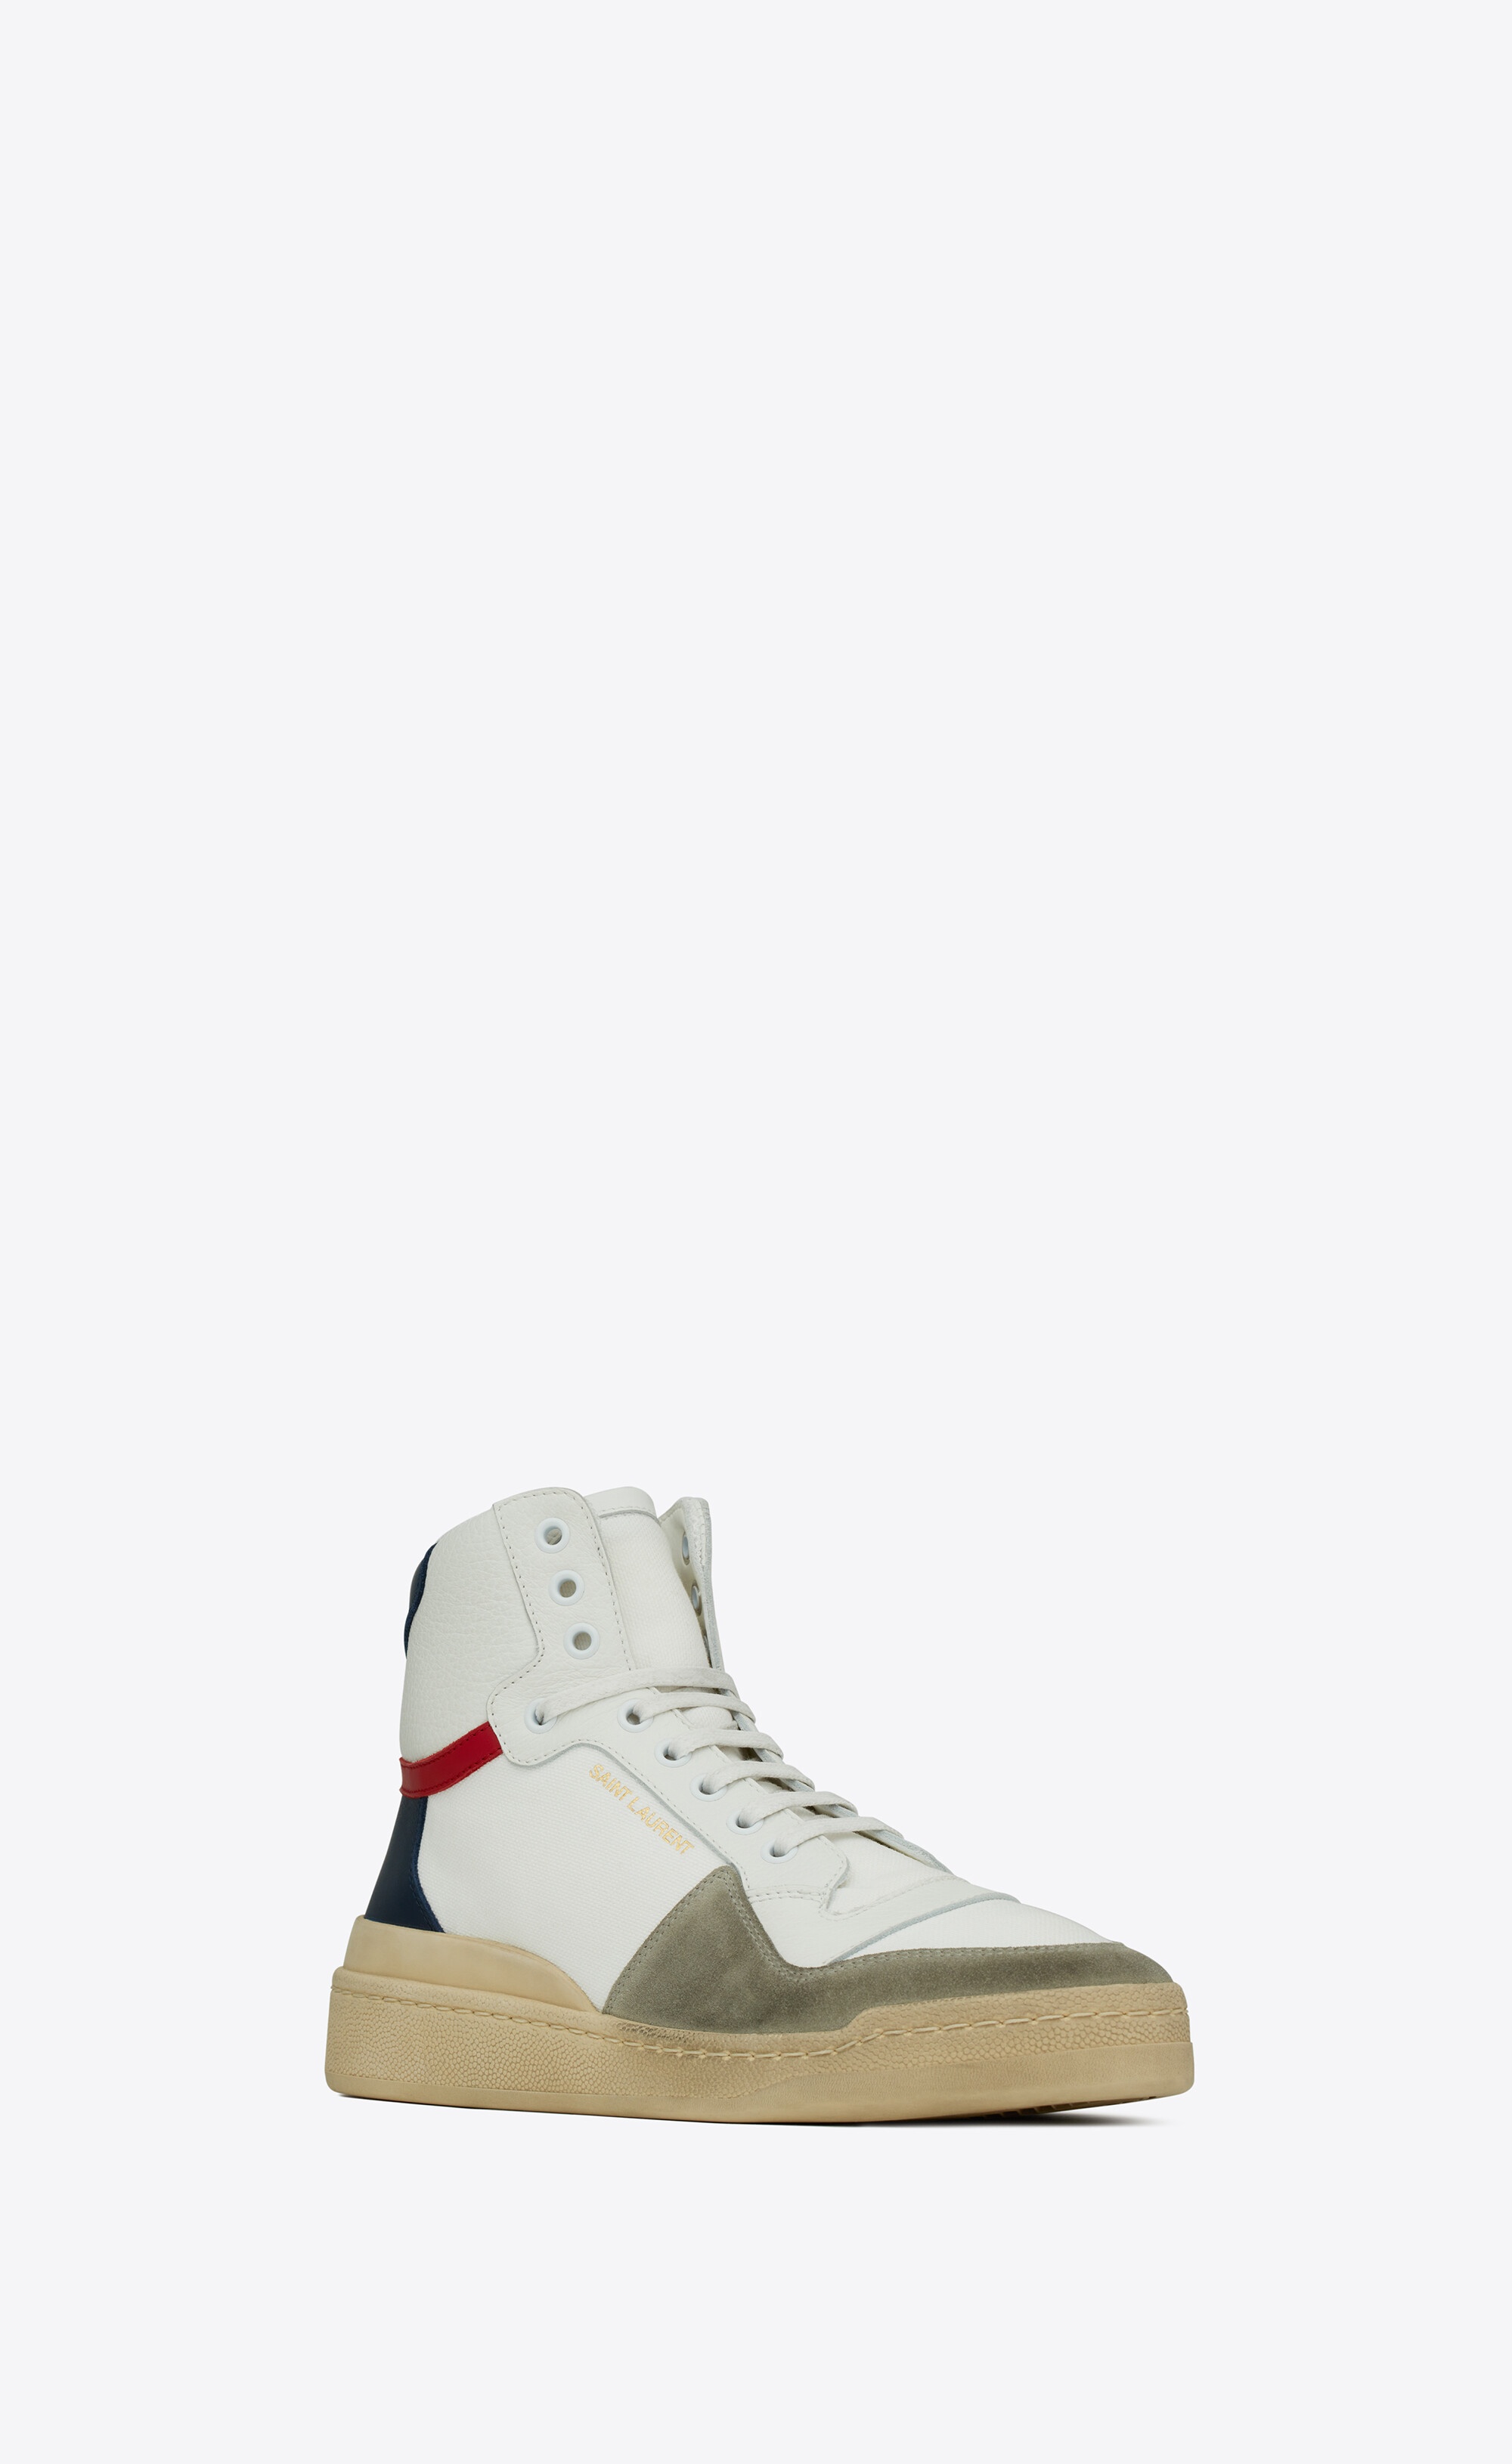 sl24 mid-top sneakers in canvas, leather and suede - 4